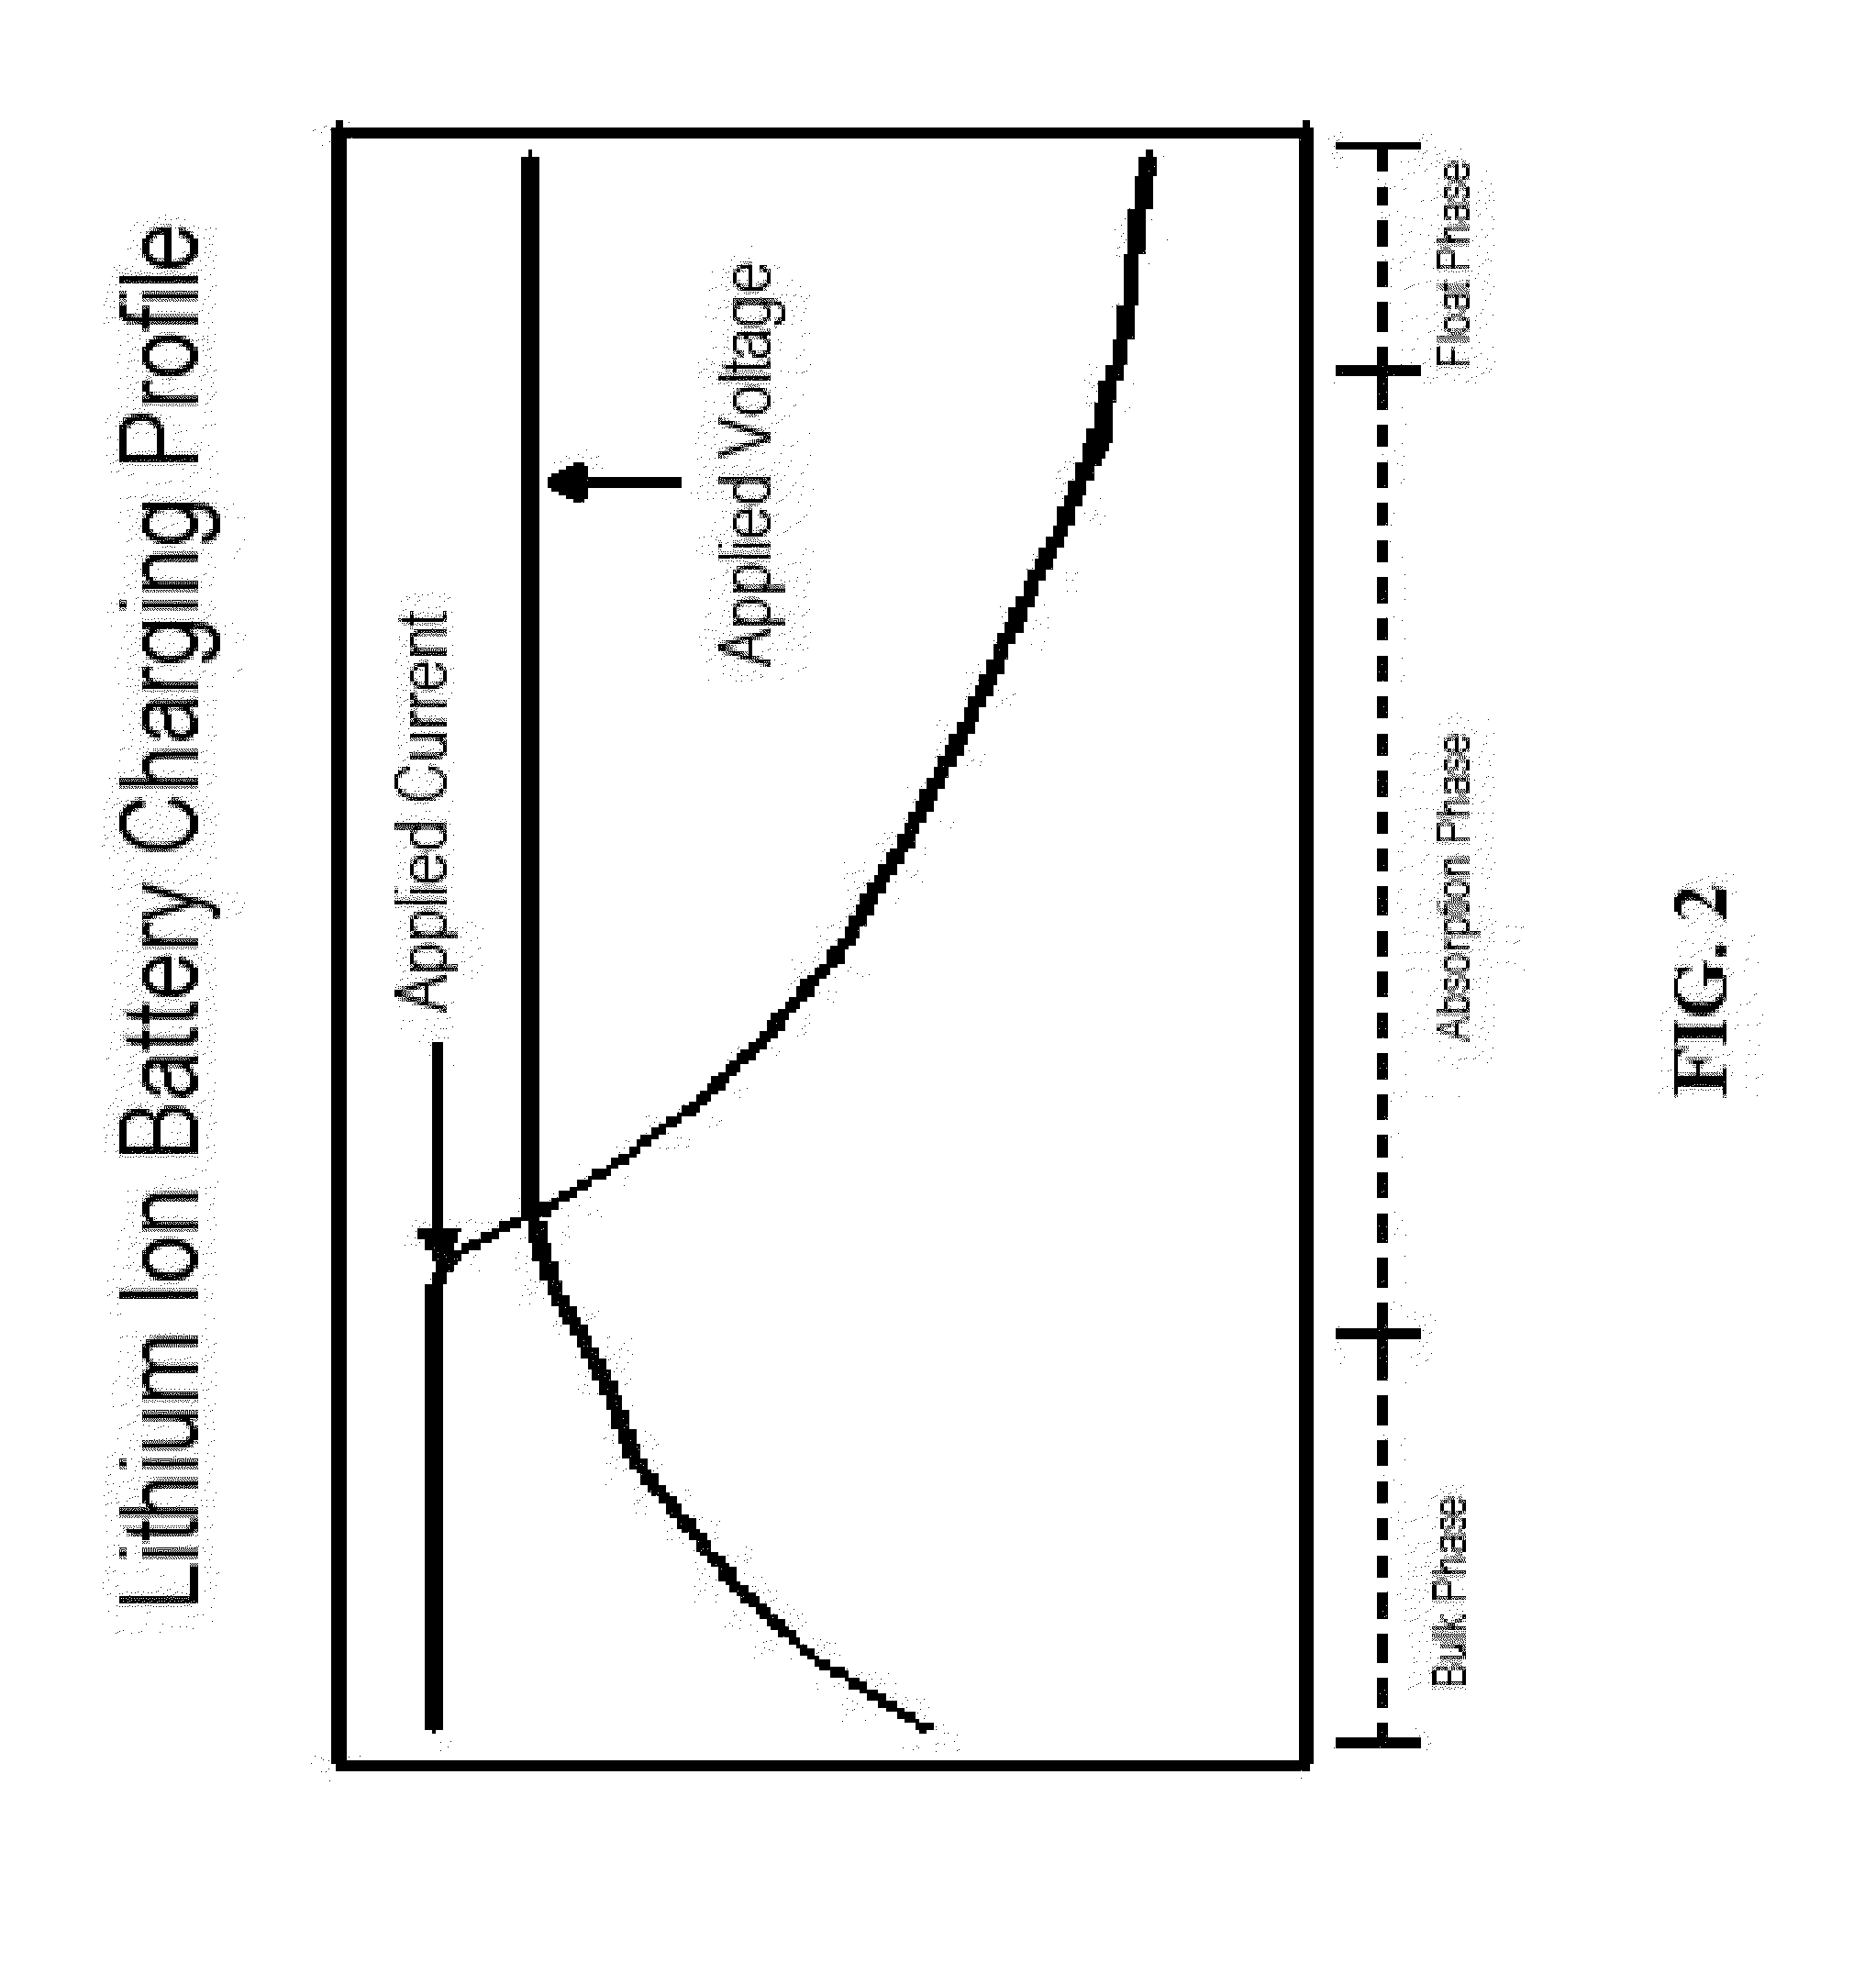 Adaptable recharging and lighting station and methods of using the same